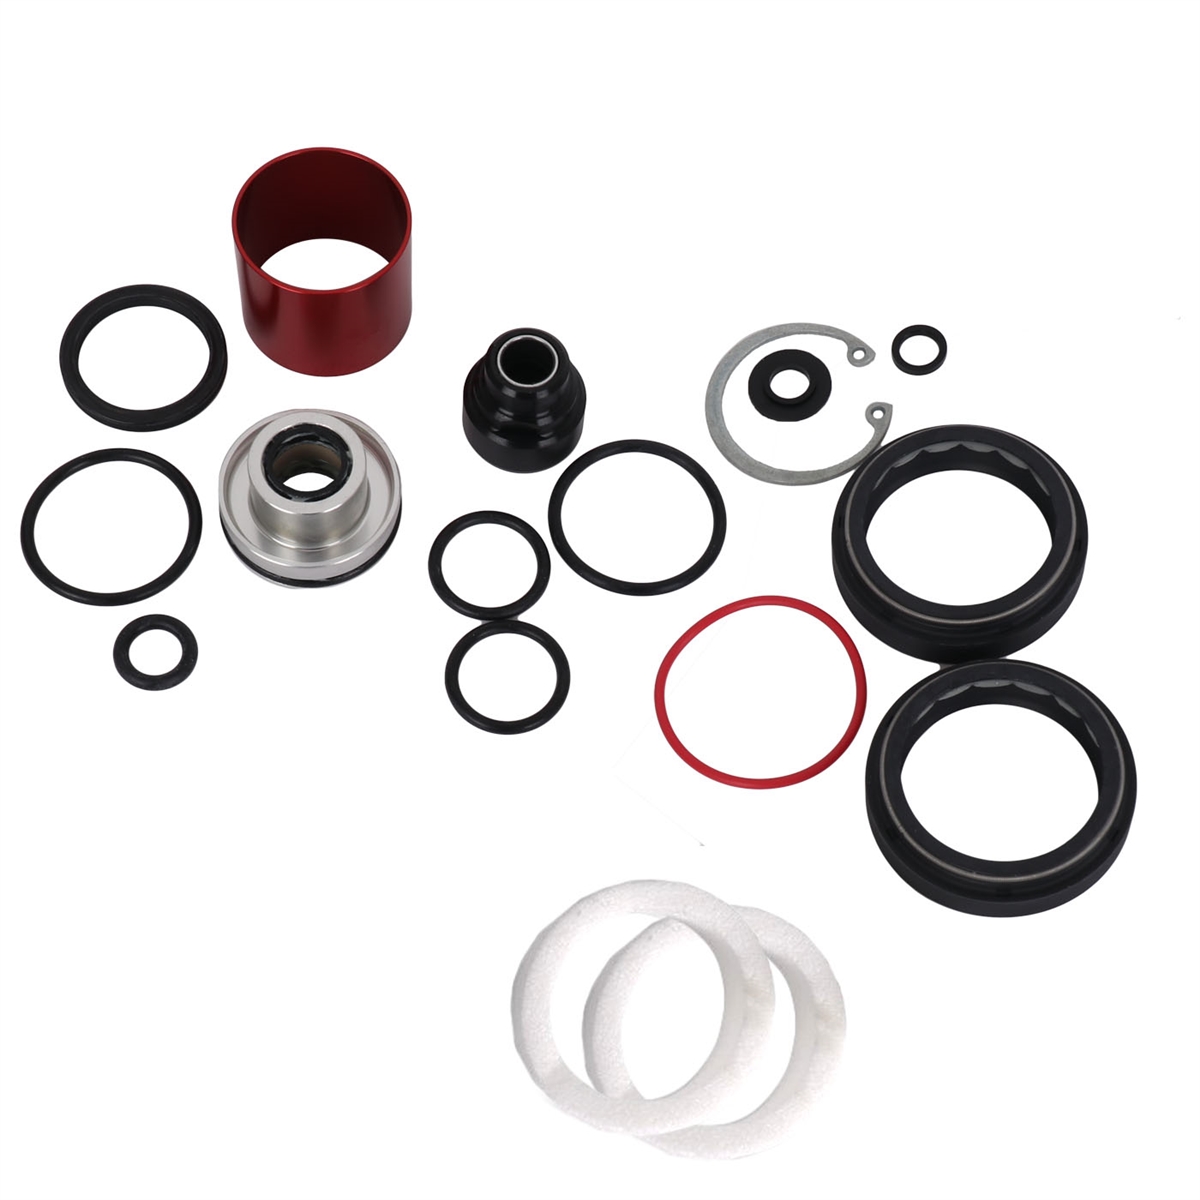 Service kit 200 hours / 1 year for ZEB SELECT+ / ULTIMATE A1 Dual Position Air (2021)